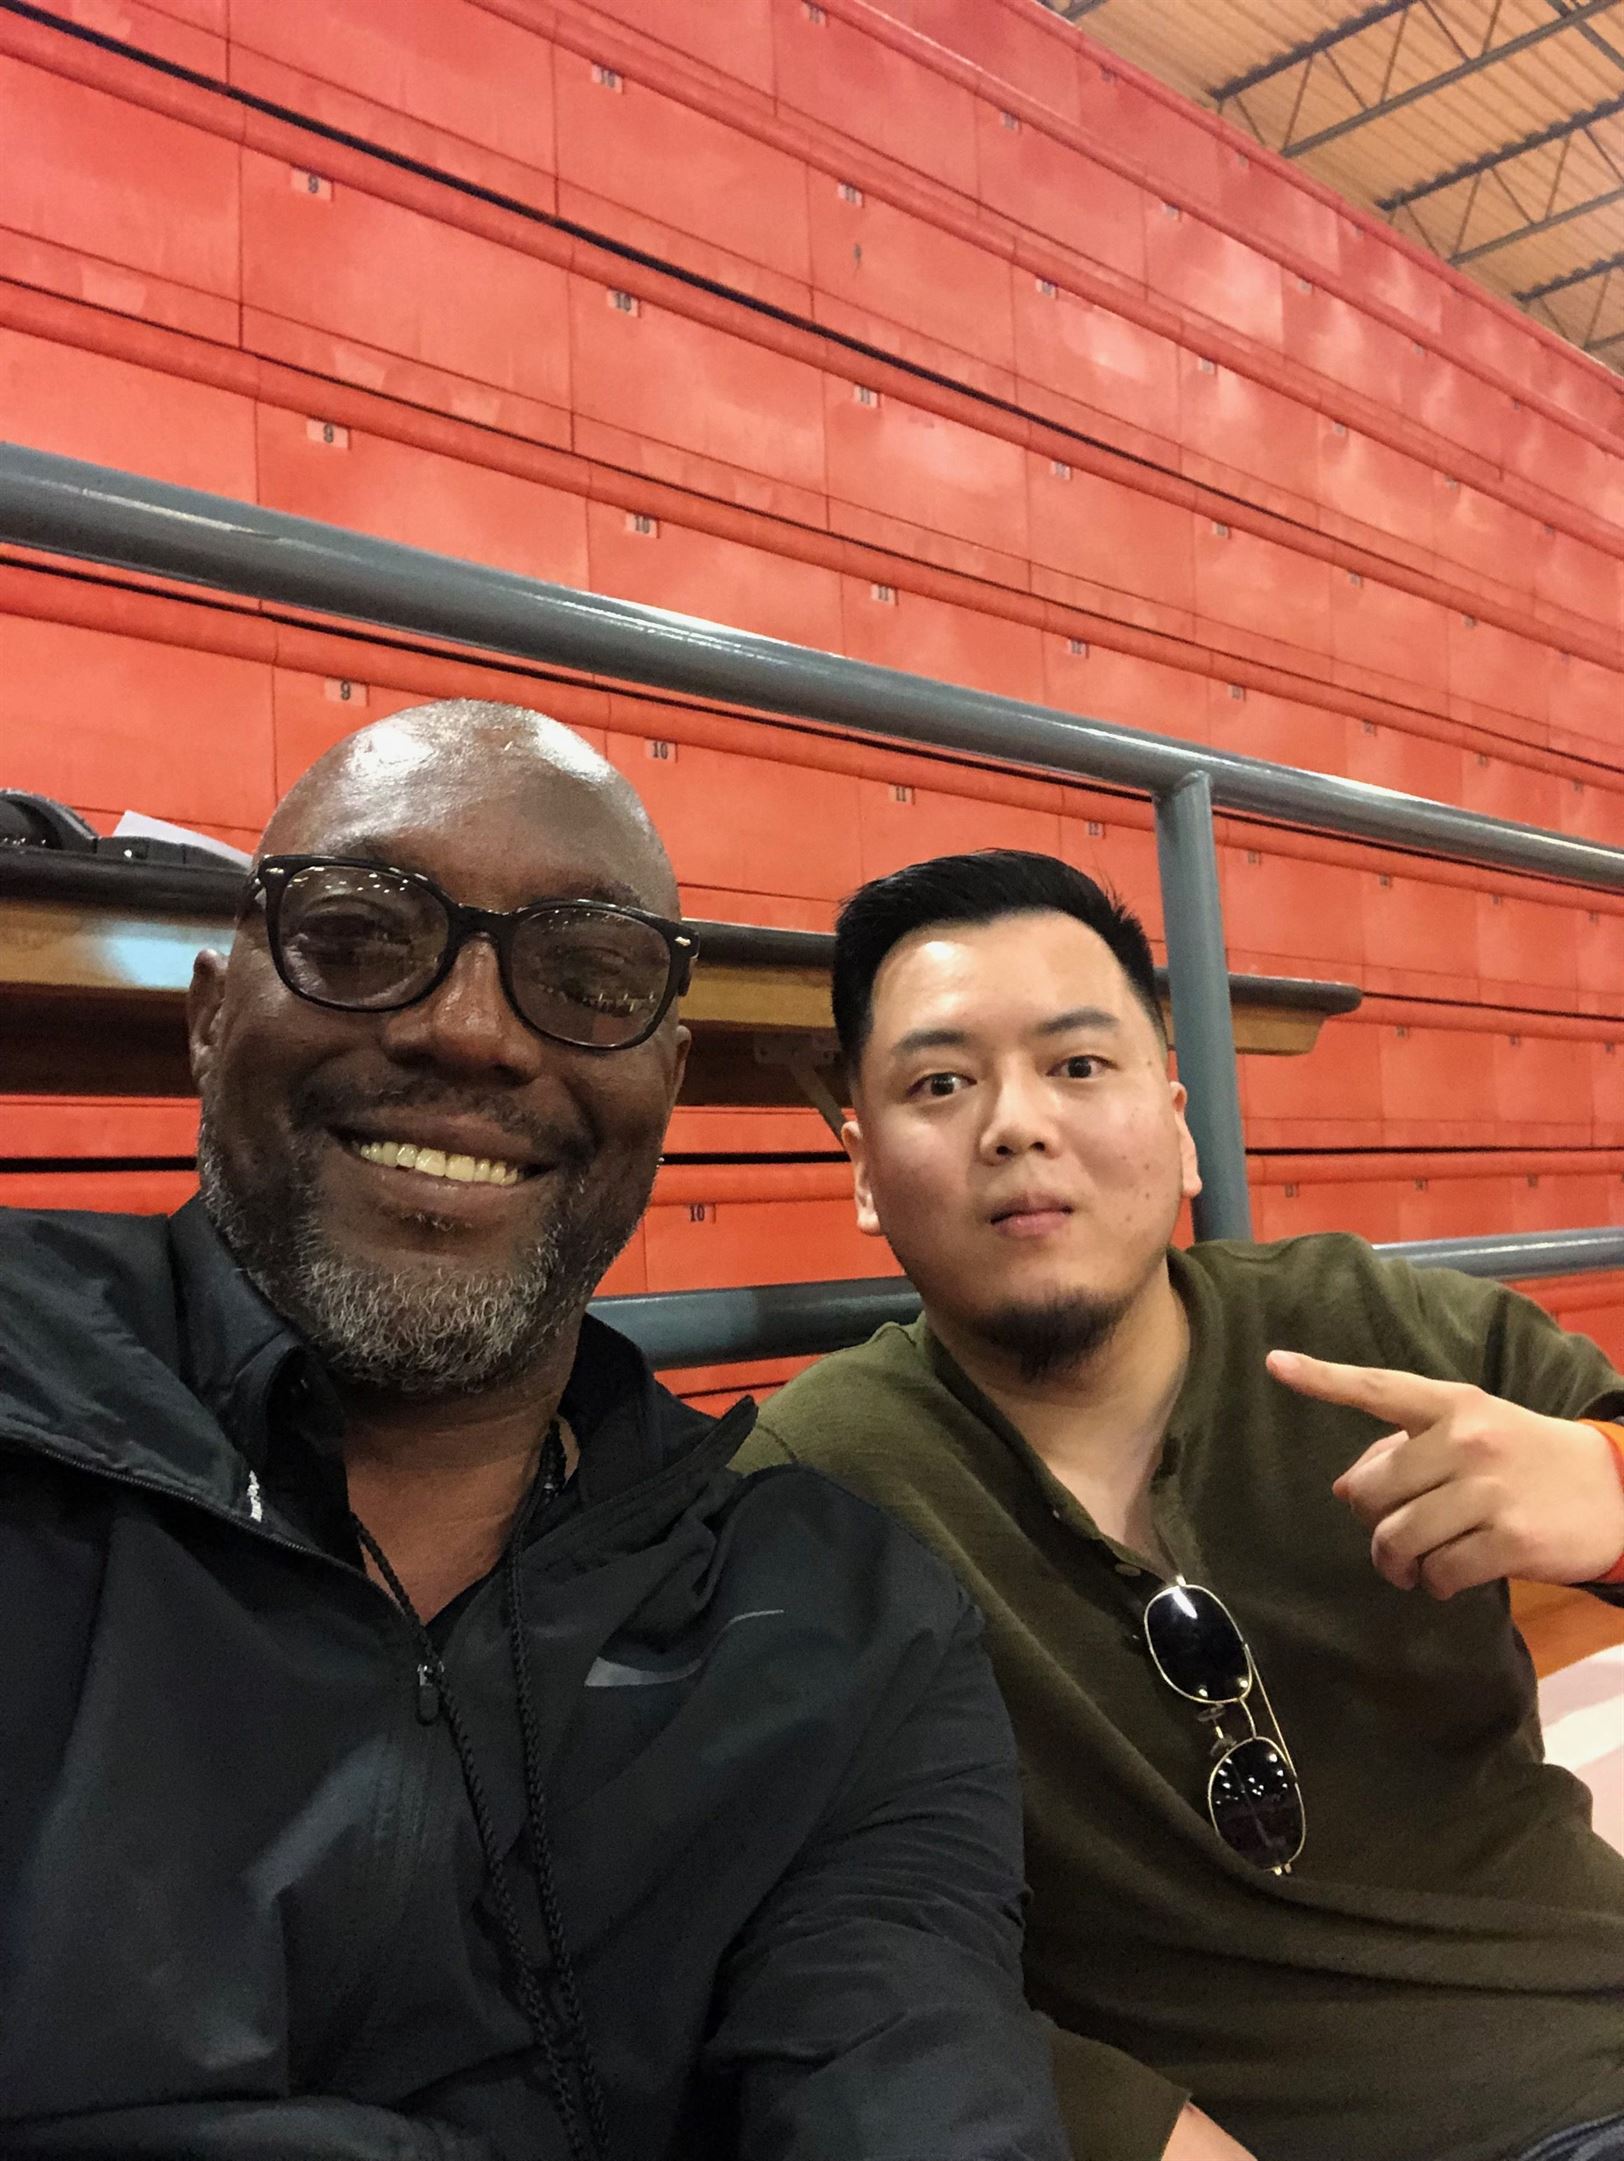 Henry Yeh is pictured alongside Keith Askins, former player of the Miami Heat and one of Yeh’s bosses. Photo courtesy of Henry Yeh